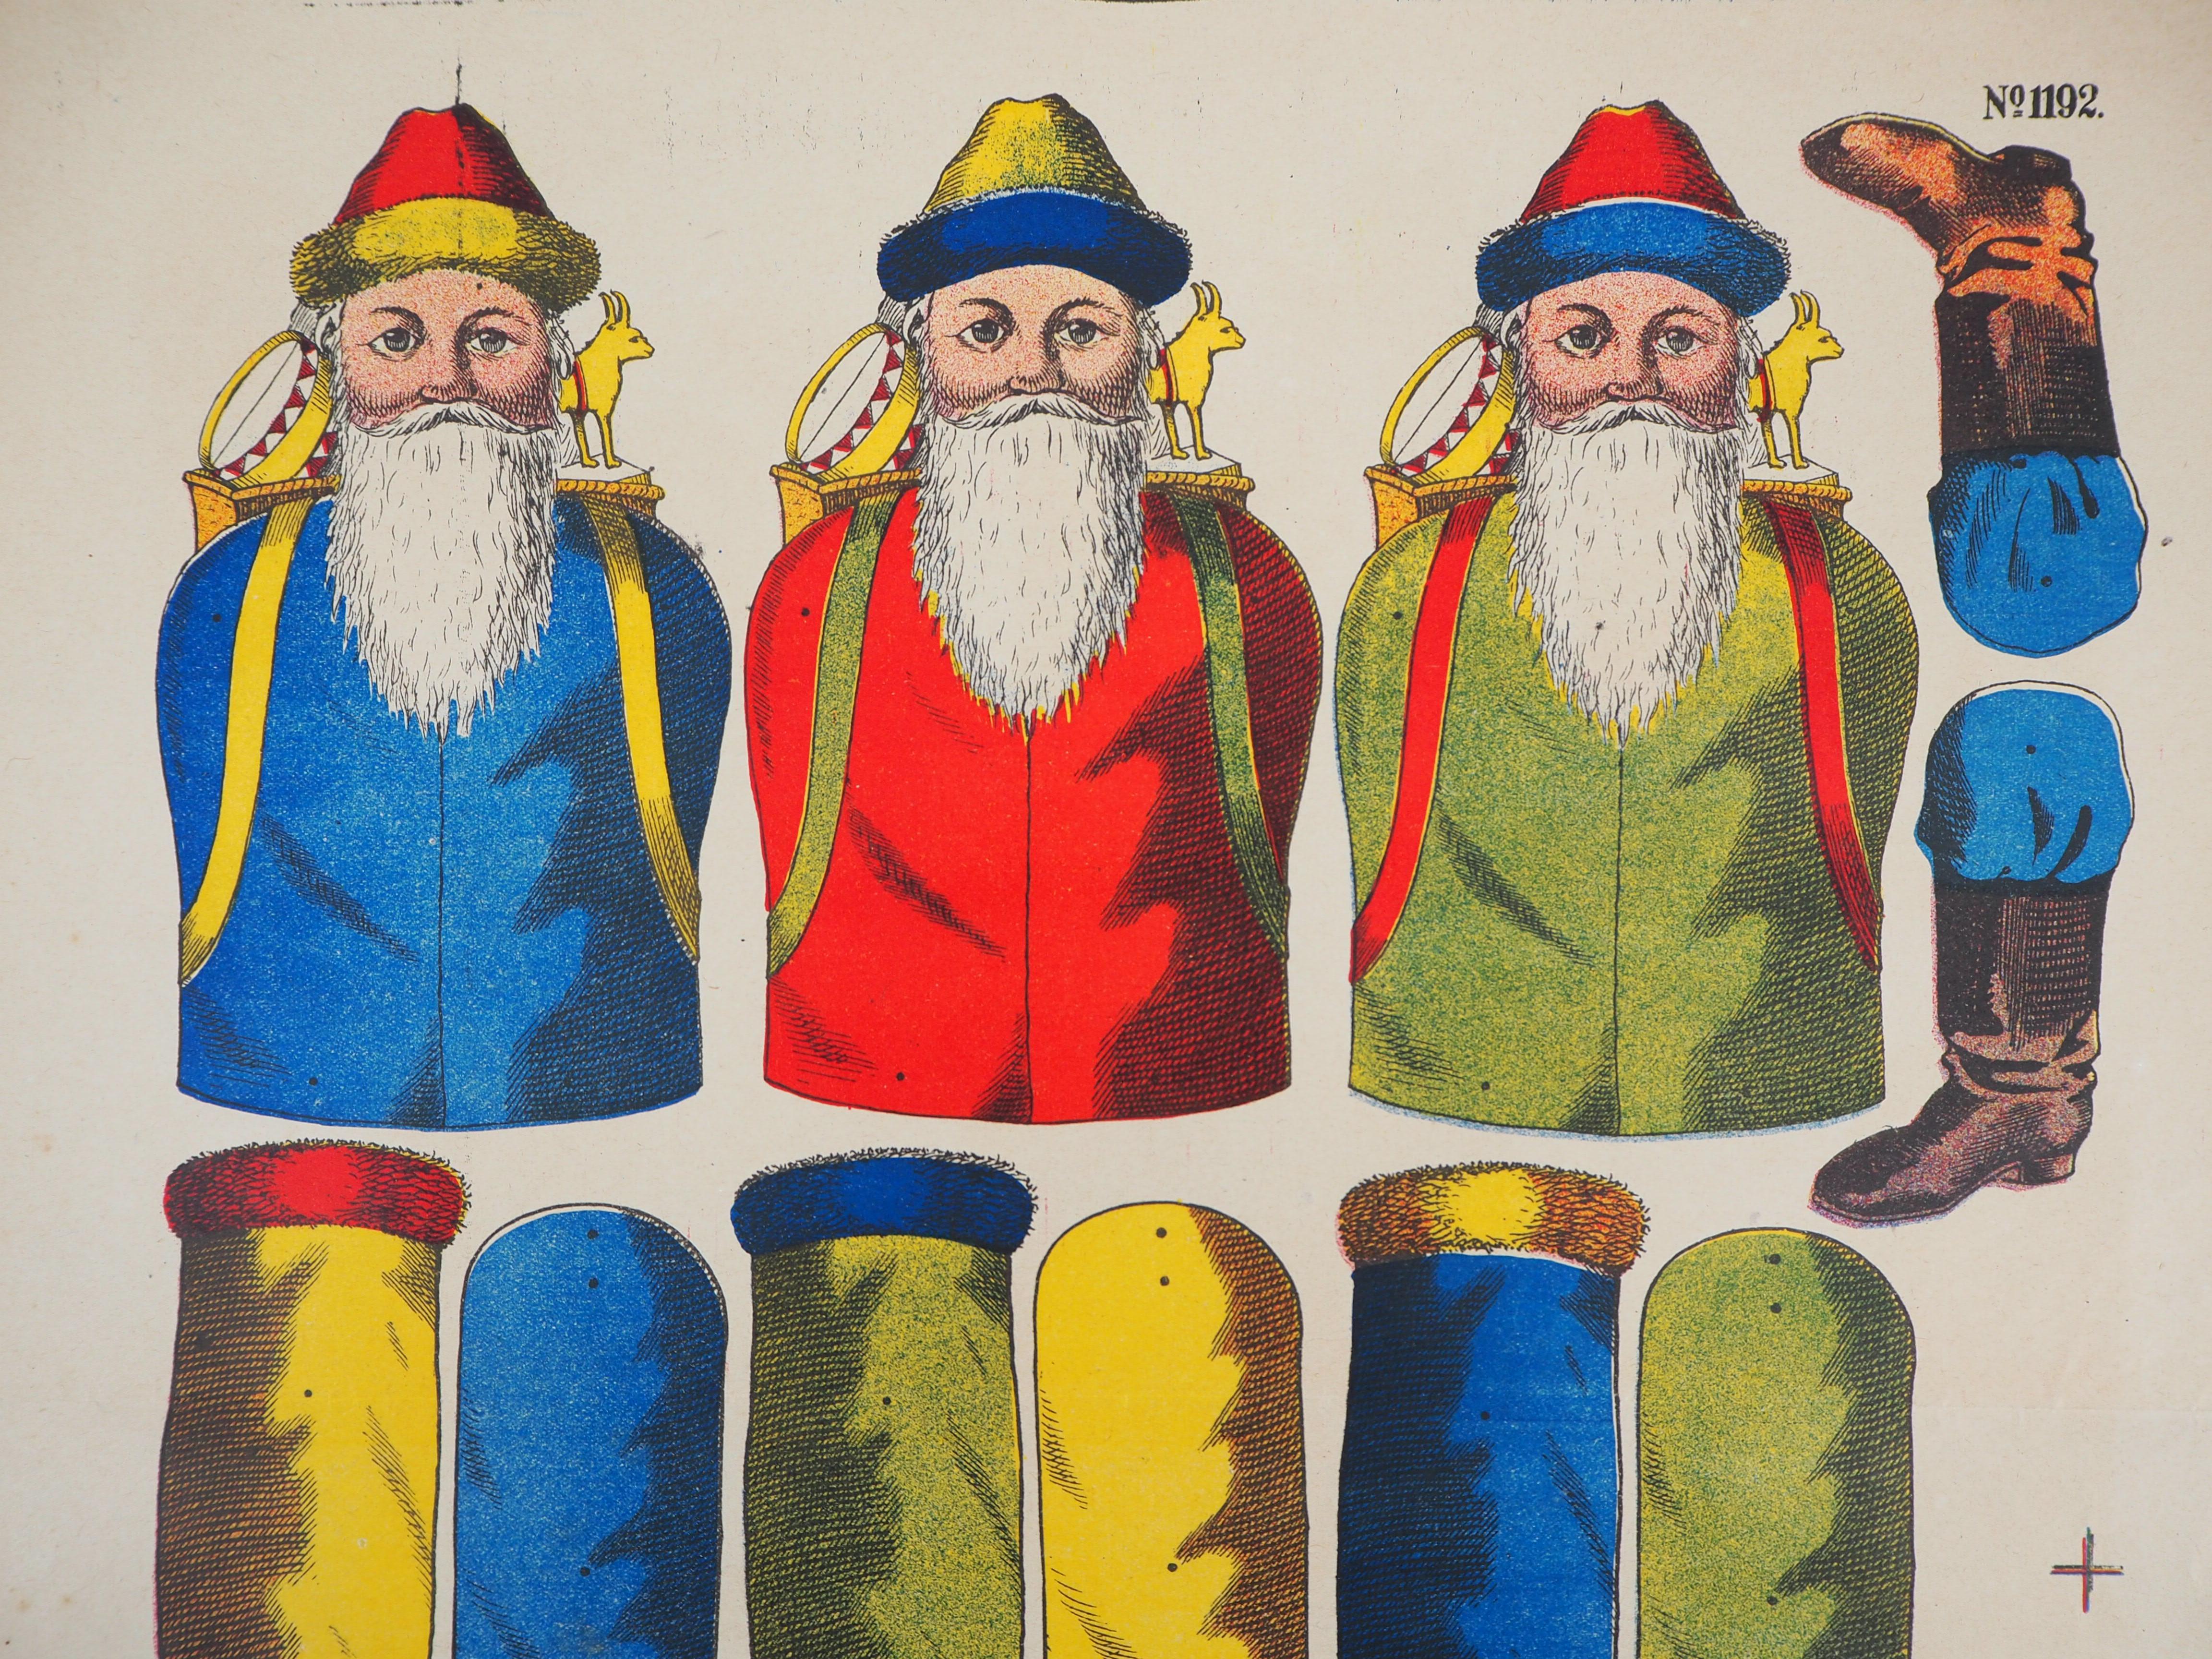 Imagerie de Wissembourg - Christmas Santa Claus - Lithograph and stencil - 1906 - Print by Unknown